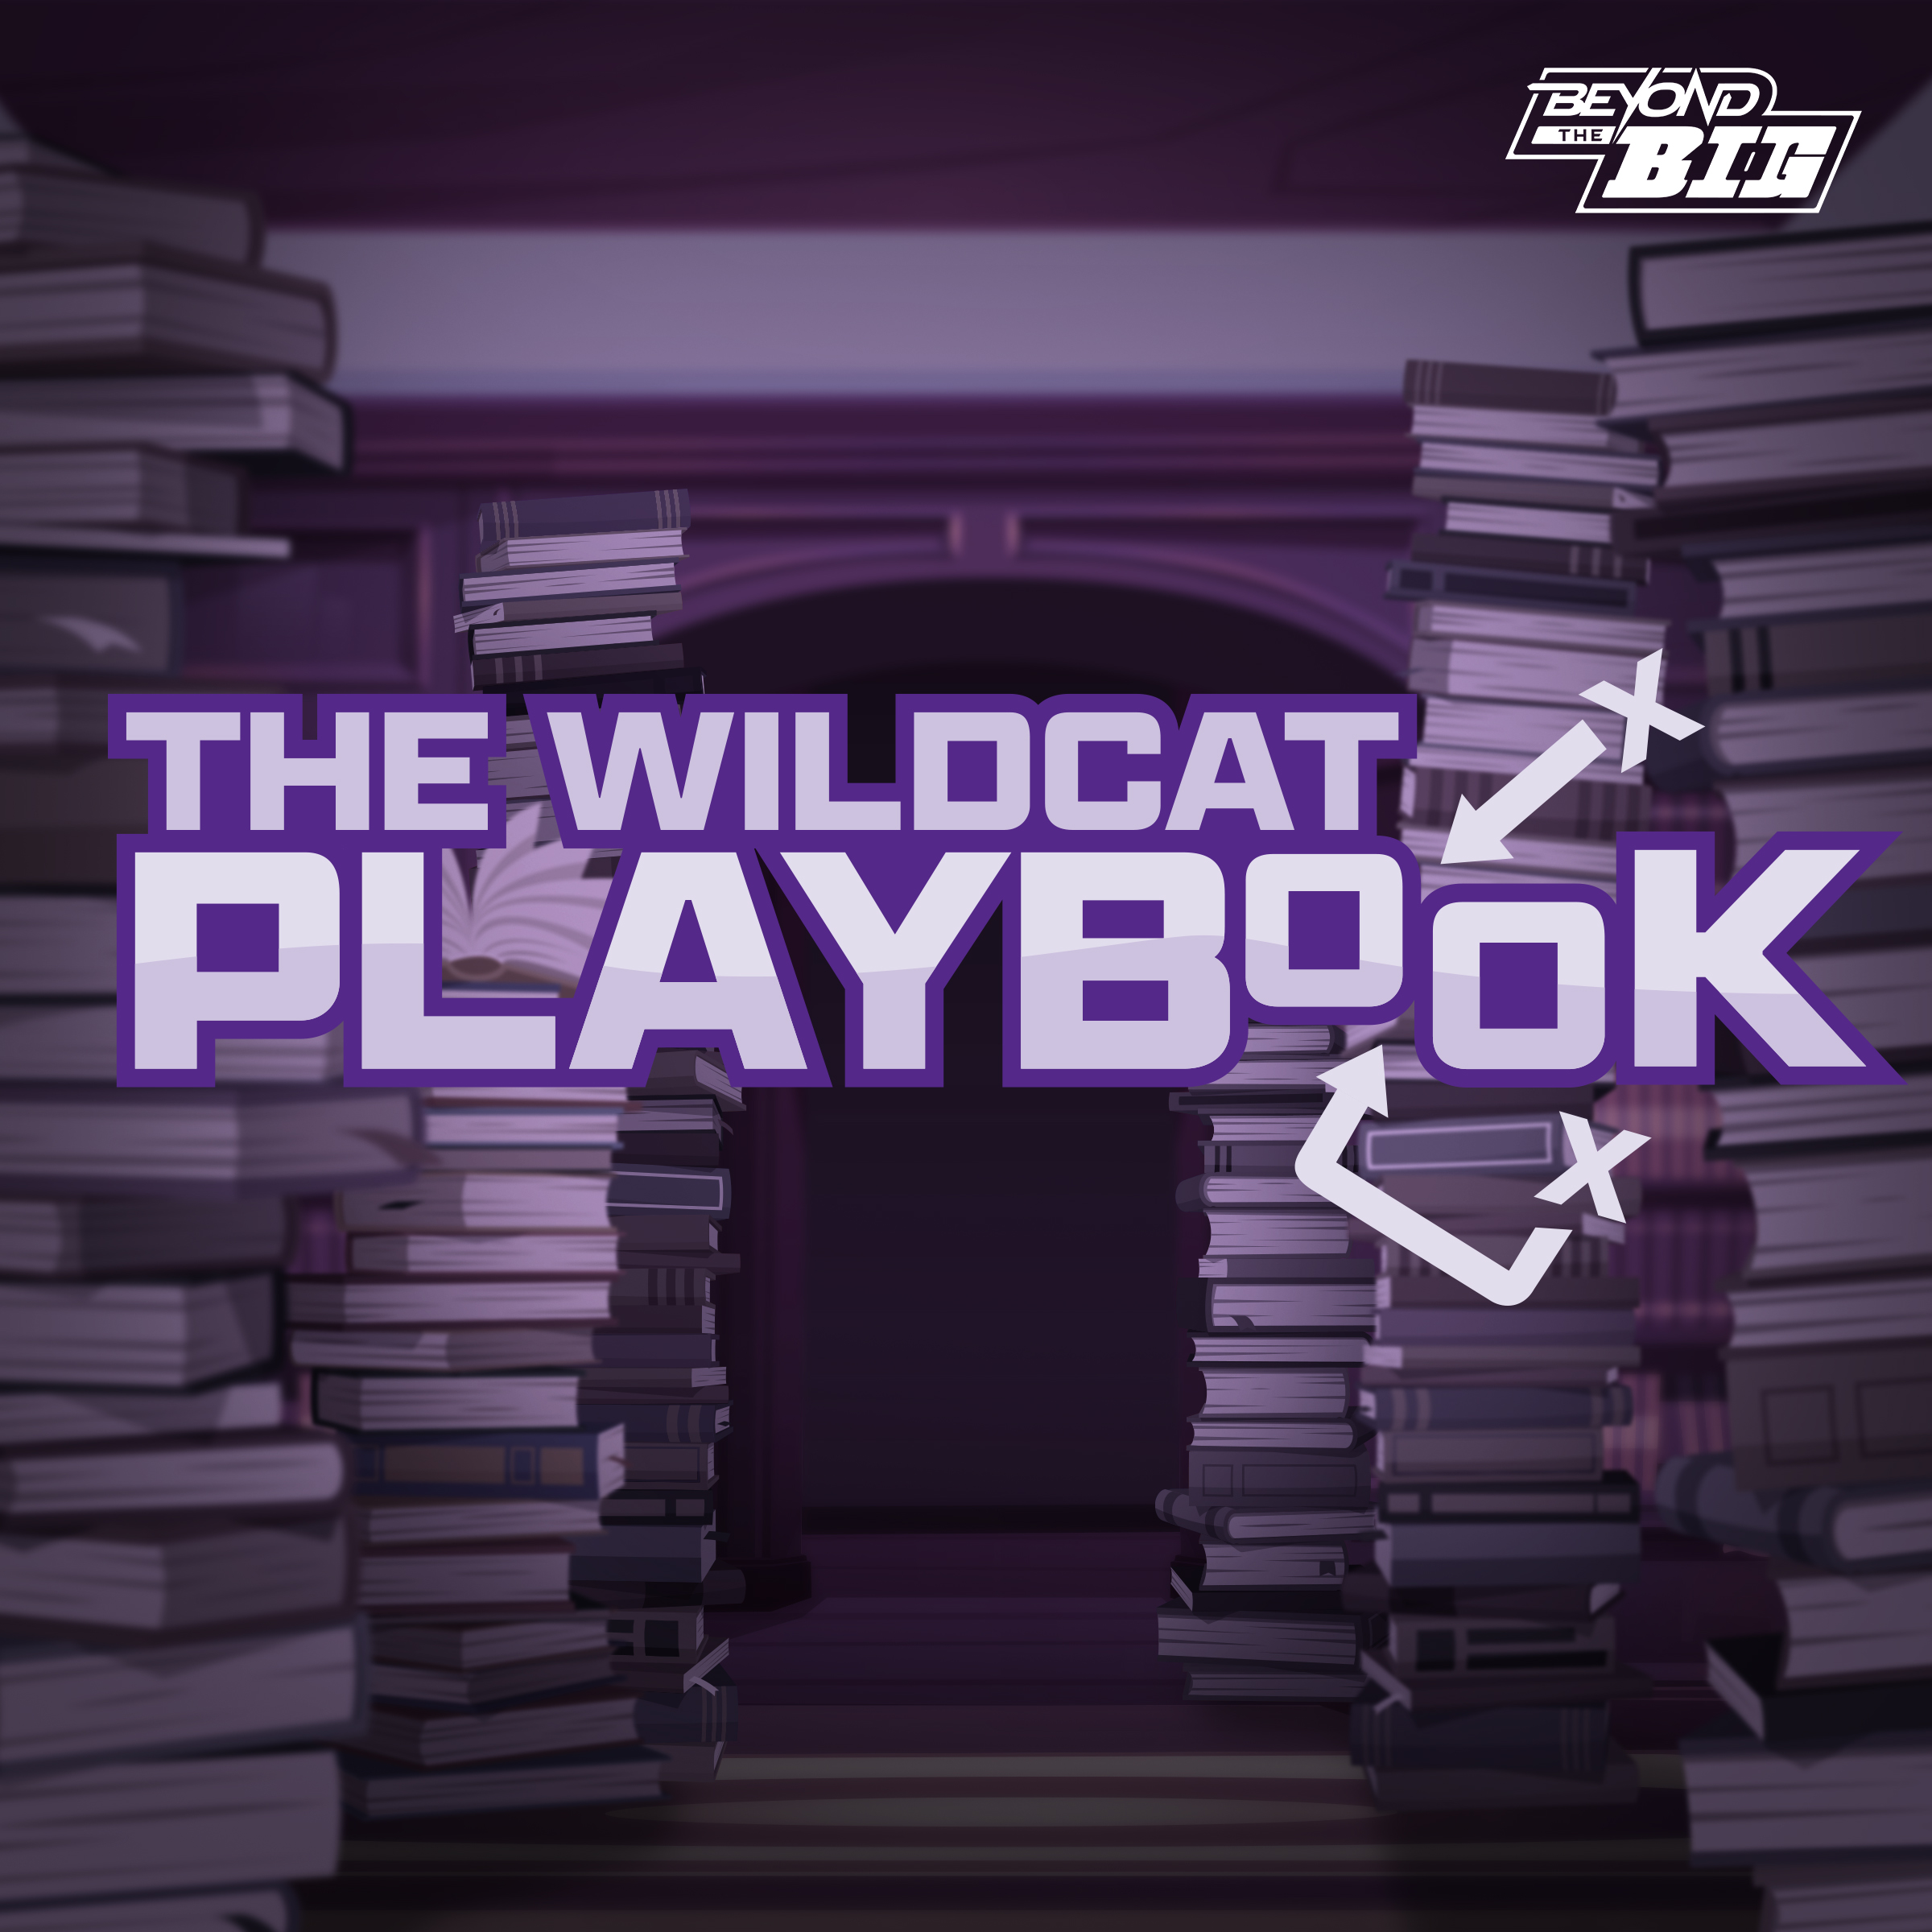 Artwork for The Wildcat Playbook